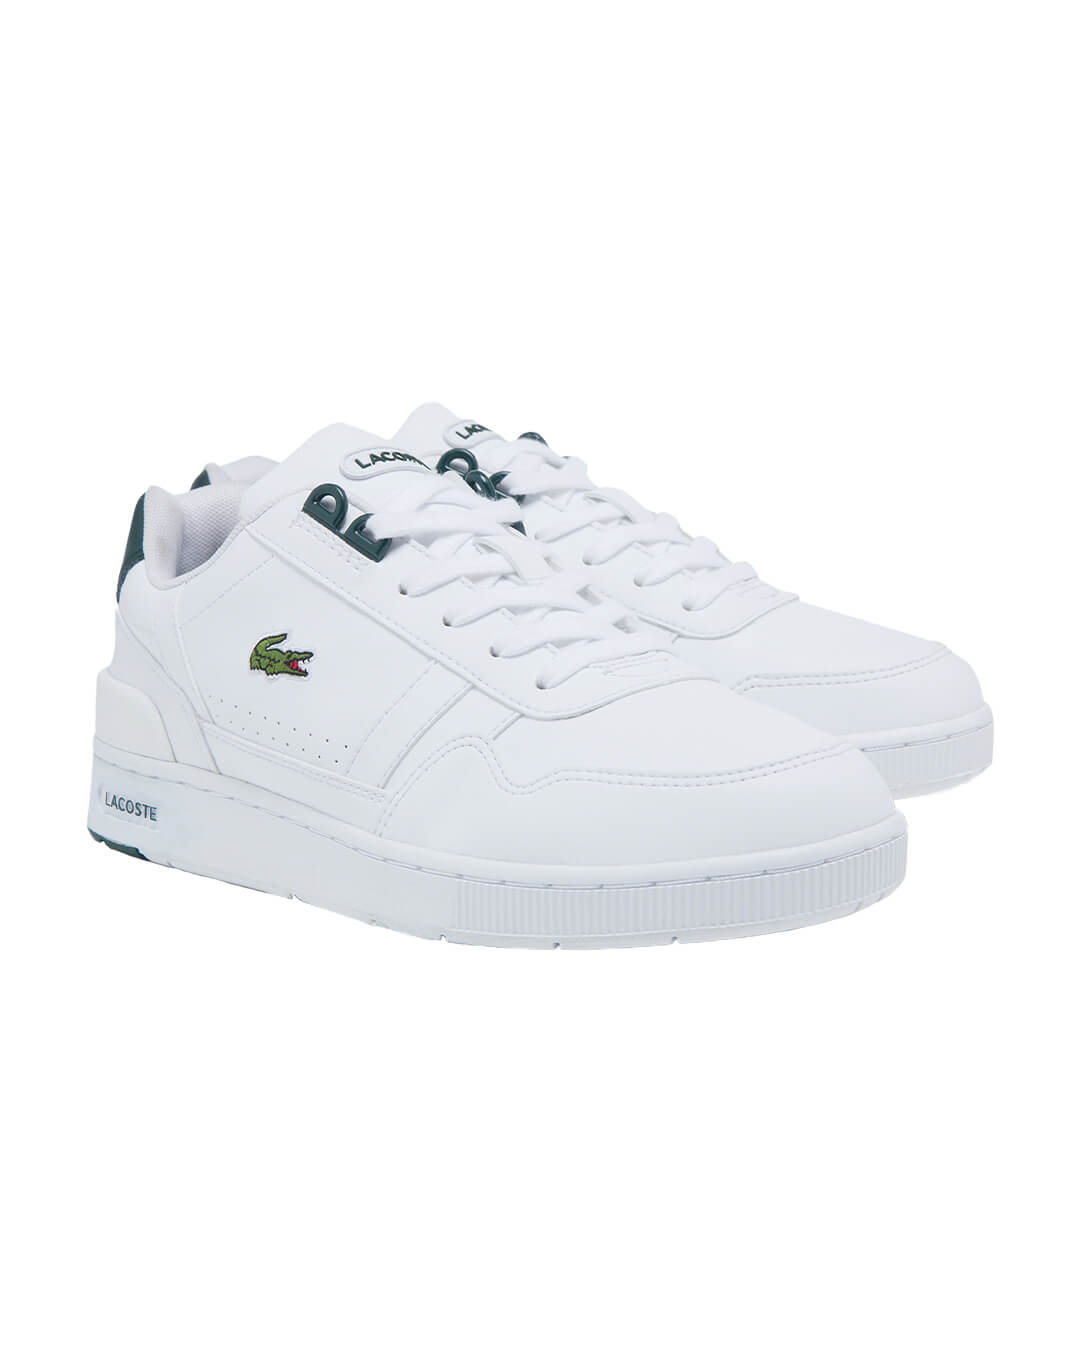 Lacoste Shoes Lacoste T-Clip Synthetic White Trainers